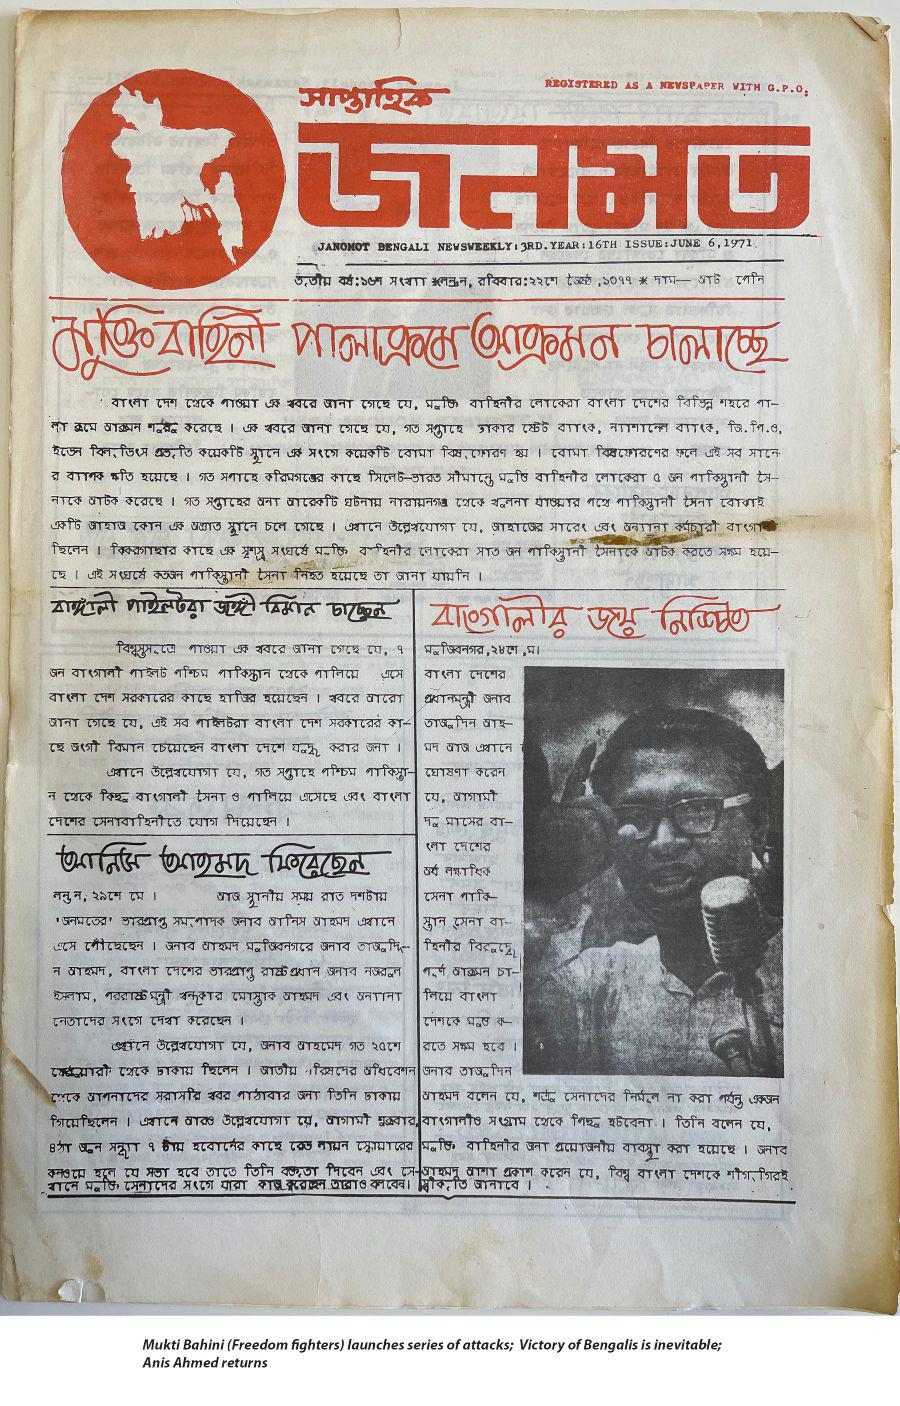 JANOMOT 6 June 1971:  Mukti Bahini (Freedom fighters) launches series of attacks; Victory of Bengalis is inevitable. Anis Ahmed returns.